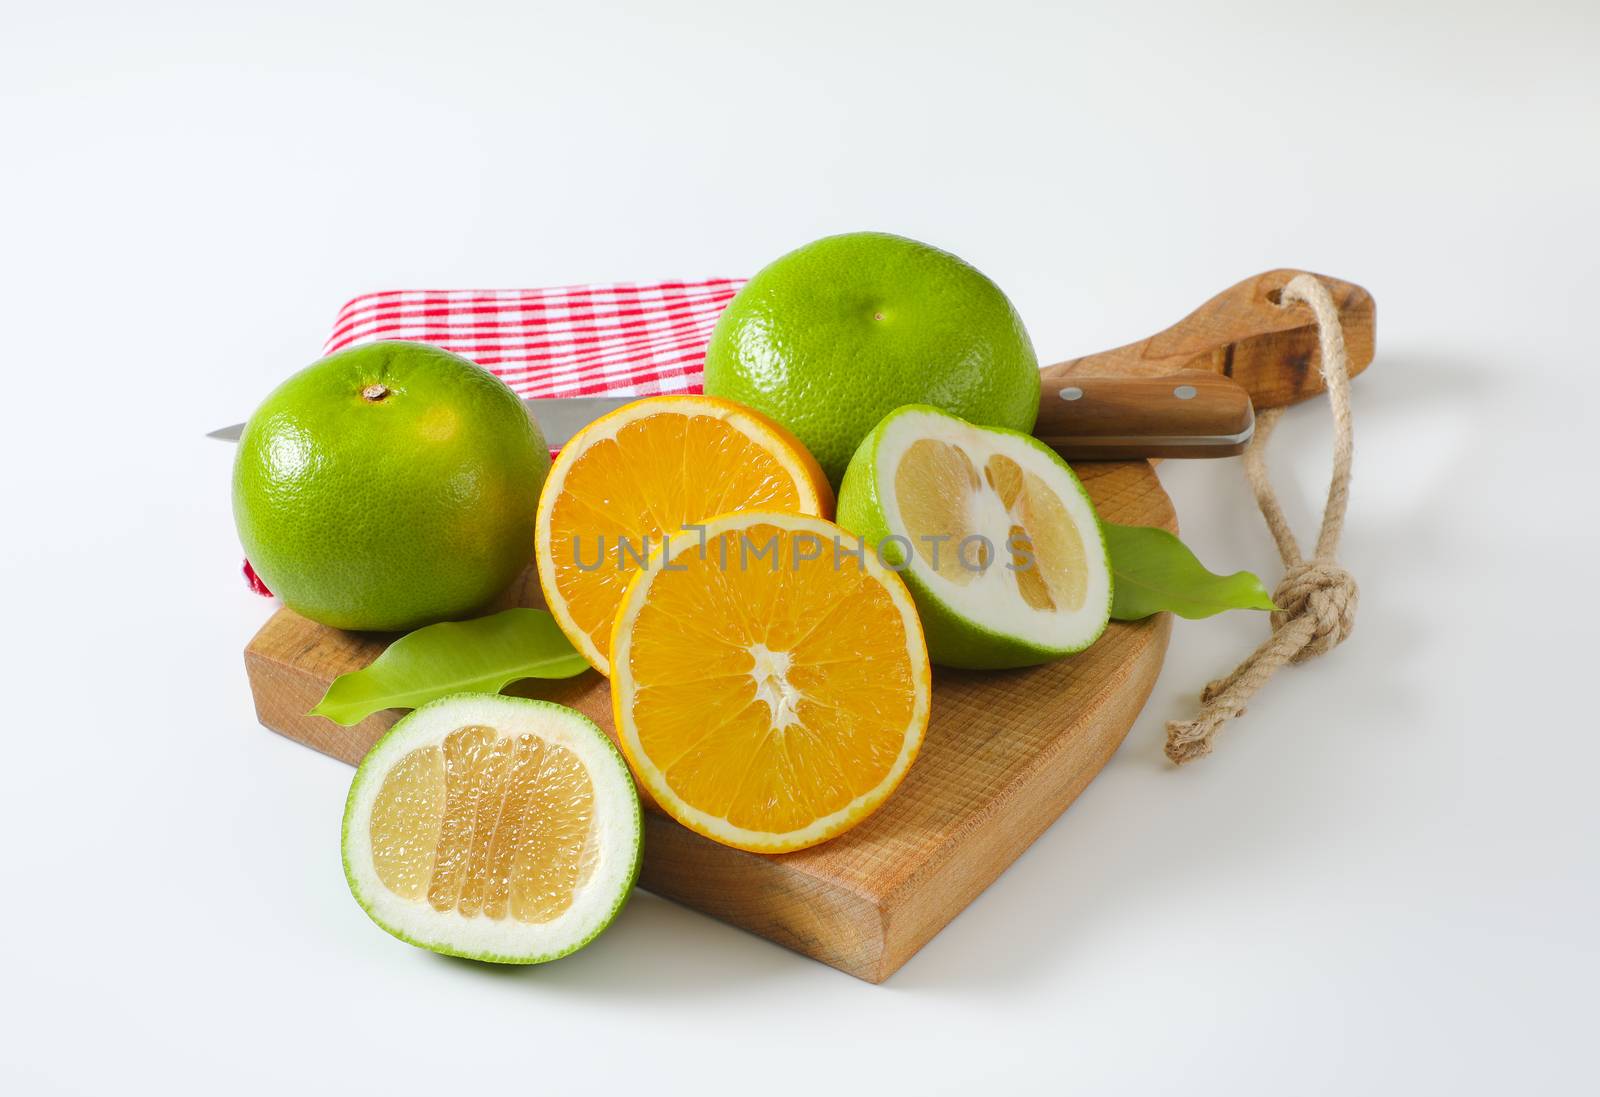 Still life of green grapefruits (sweetie, pomelit, oroblanco grapefruit) and halved orange with knife and tea towel on cutting board